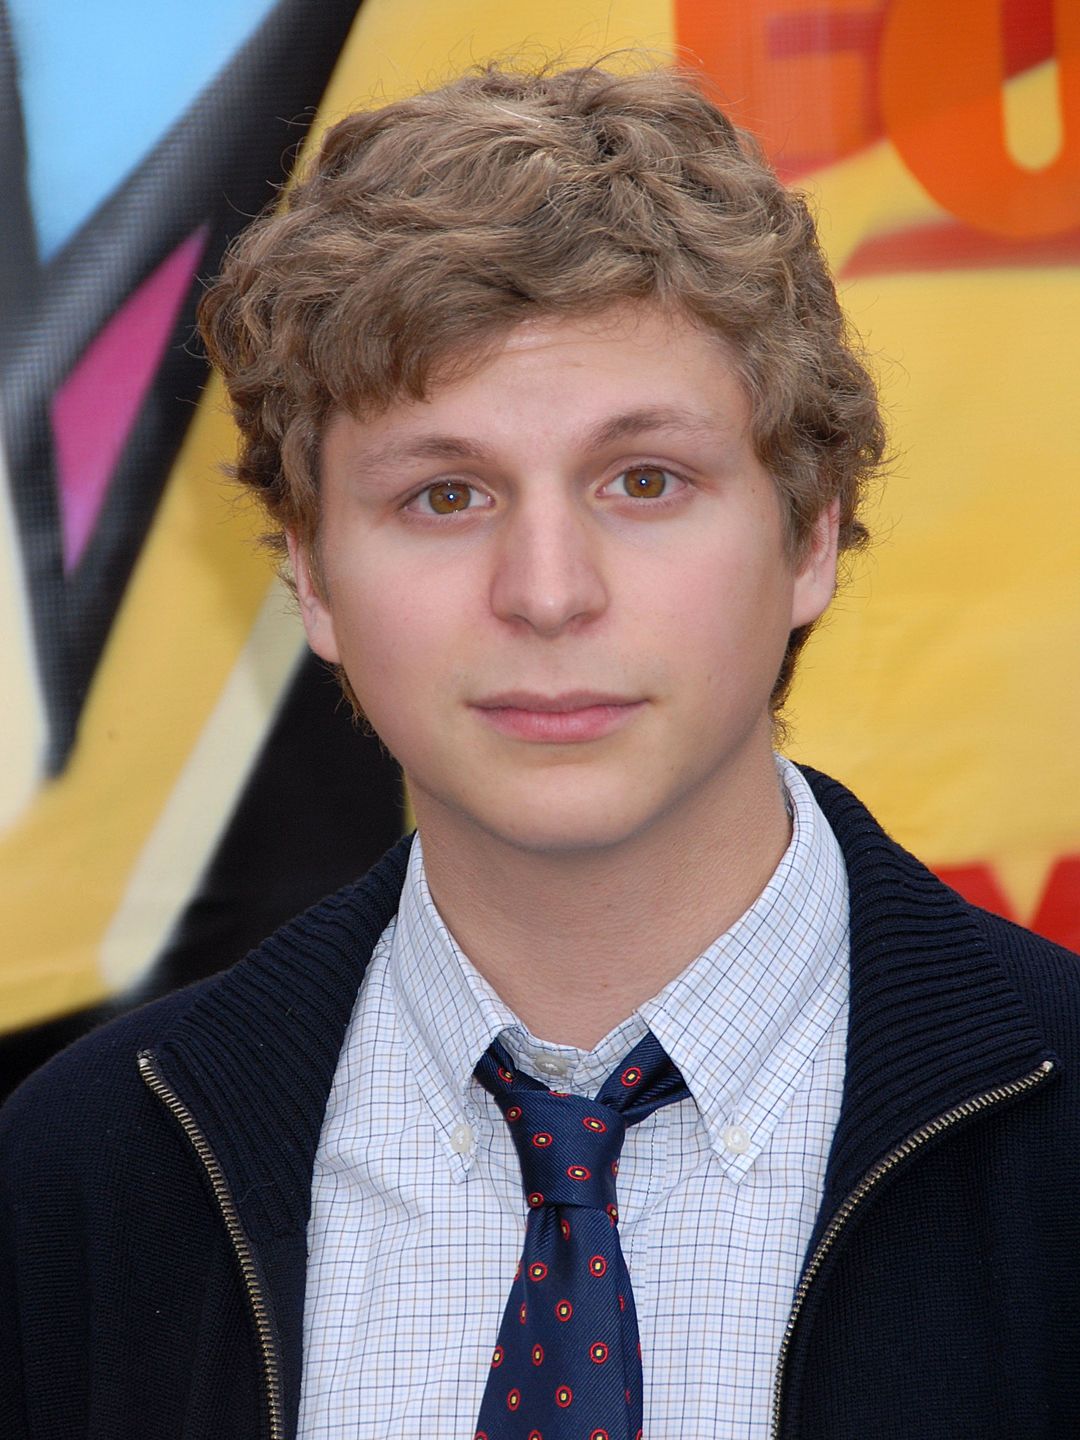 Michael Cera how old is he